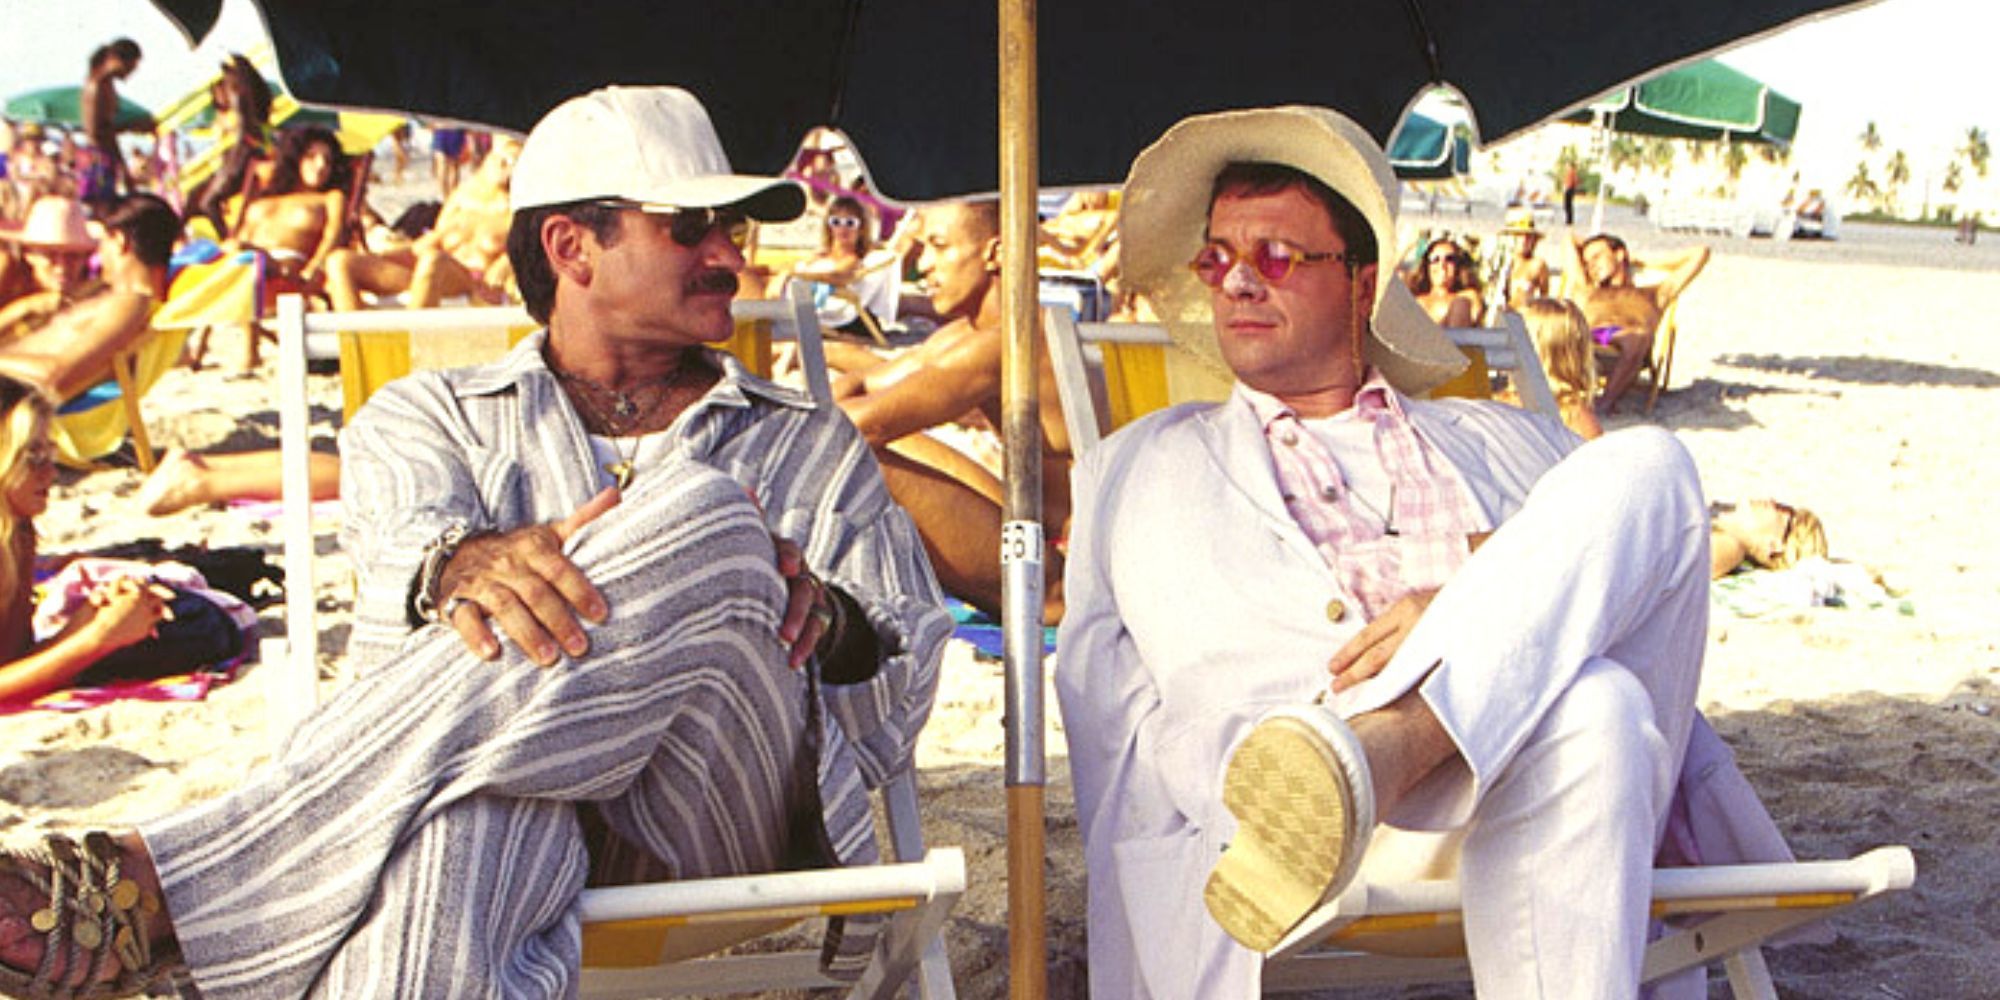 Robin Williams sitting next to Nathan Lane on the beach in The Birdcage